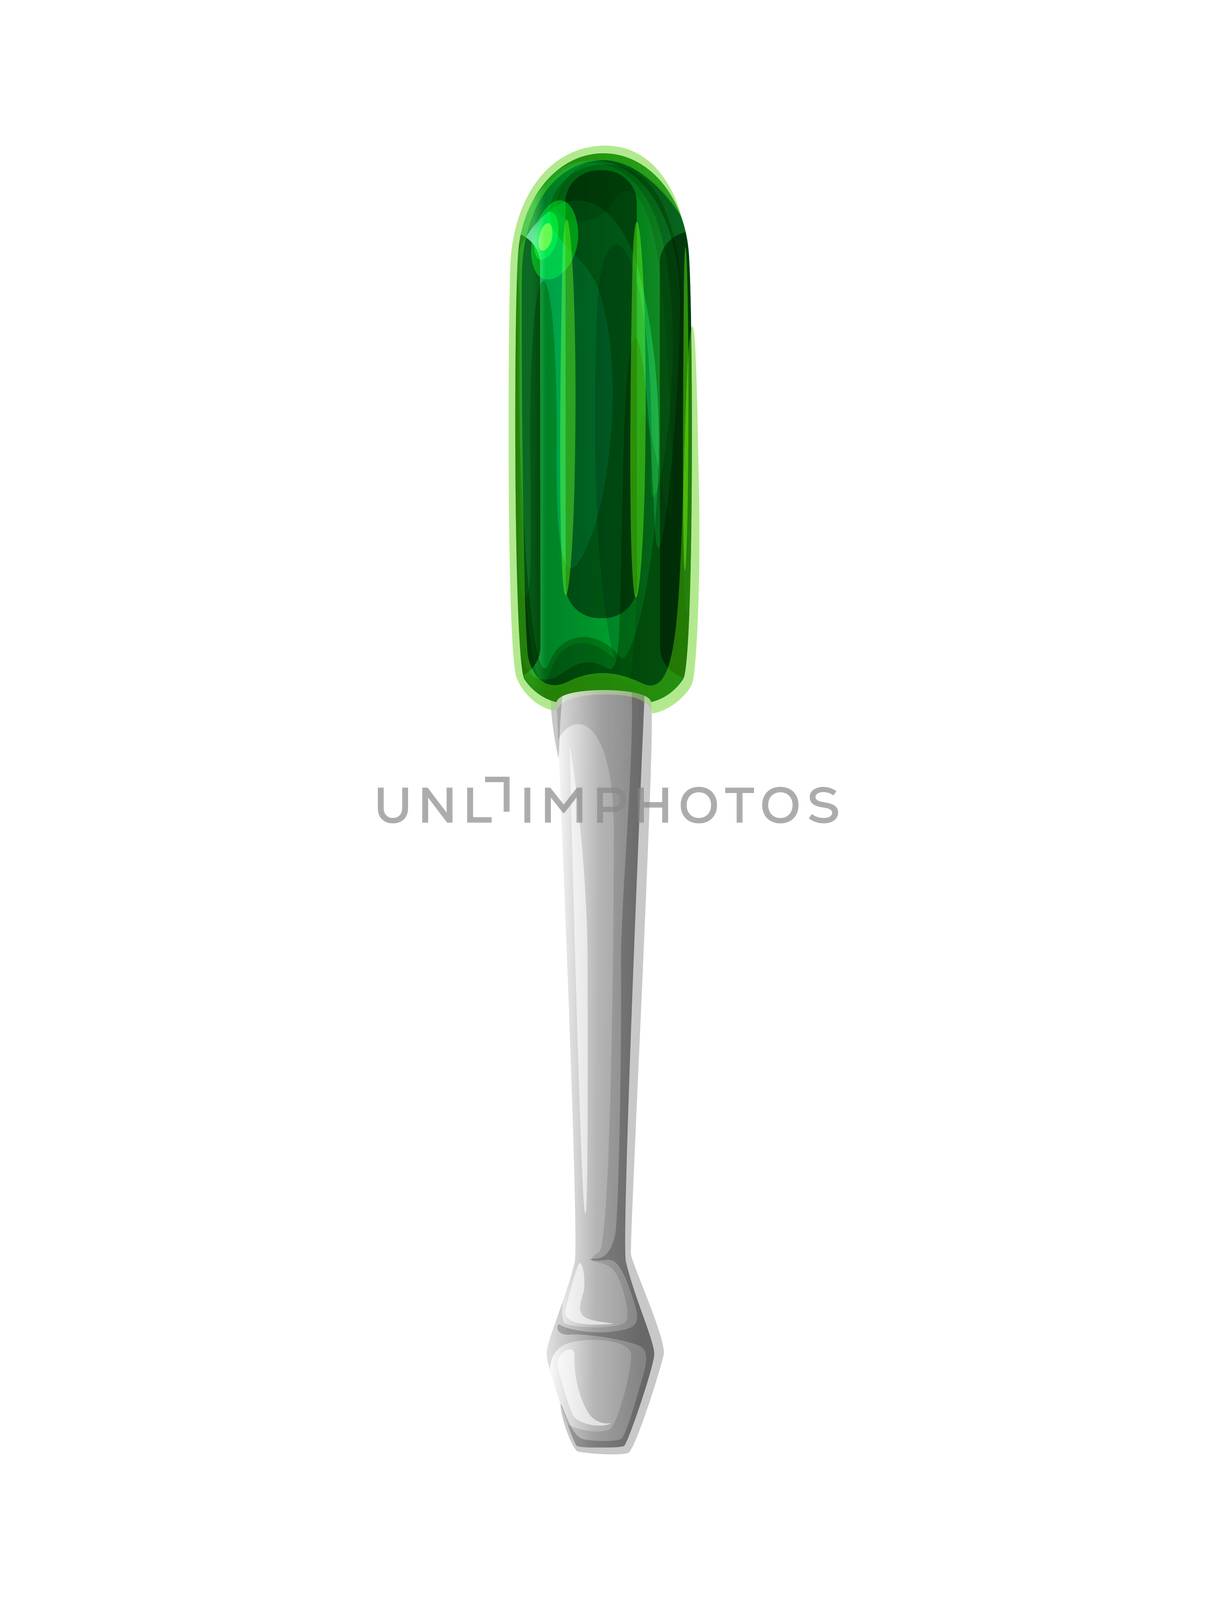 A nice and beautiful screwdriver to remove screws, image that can be used for various subjects